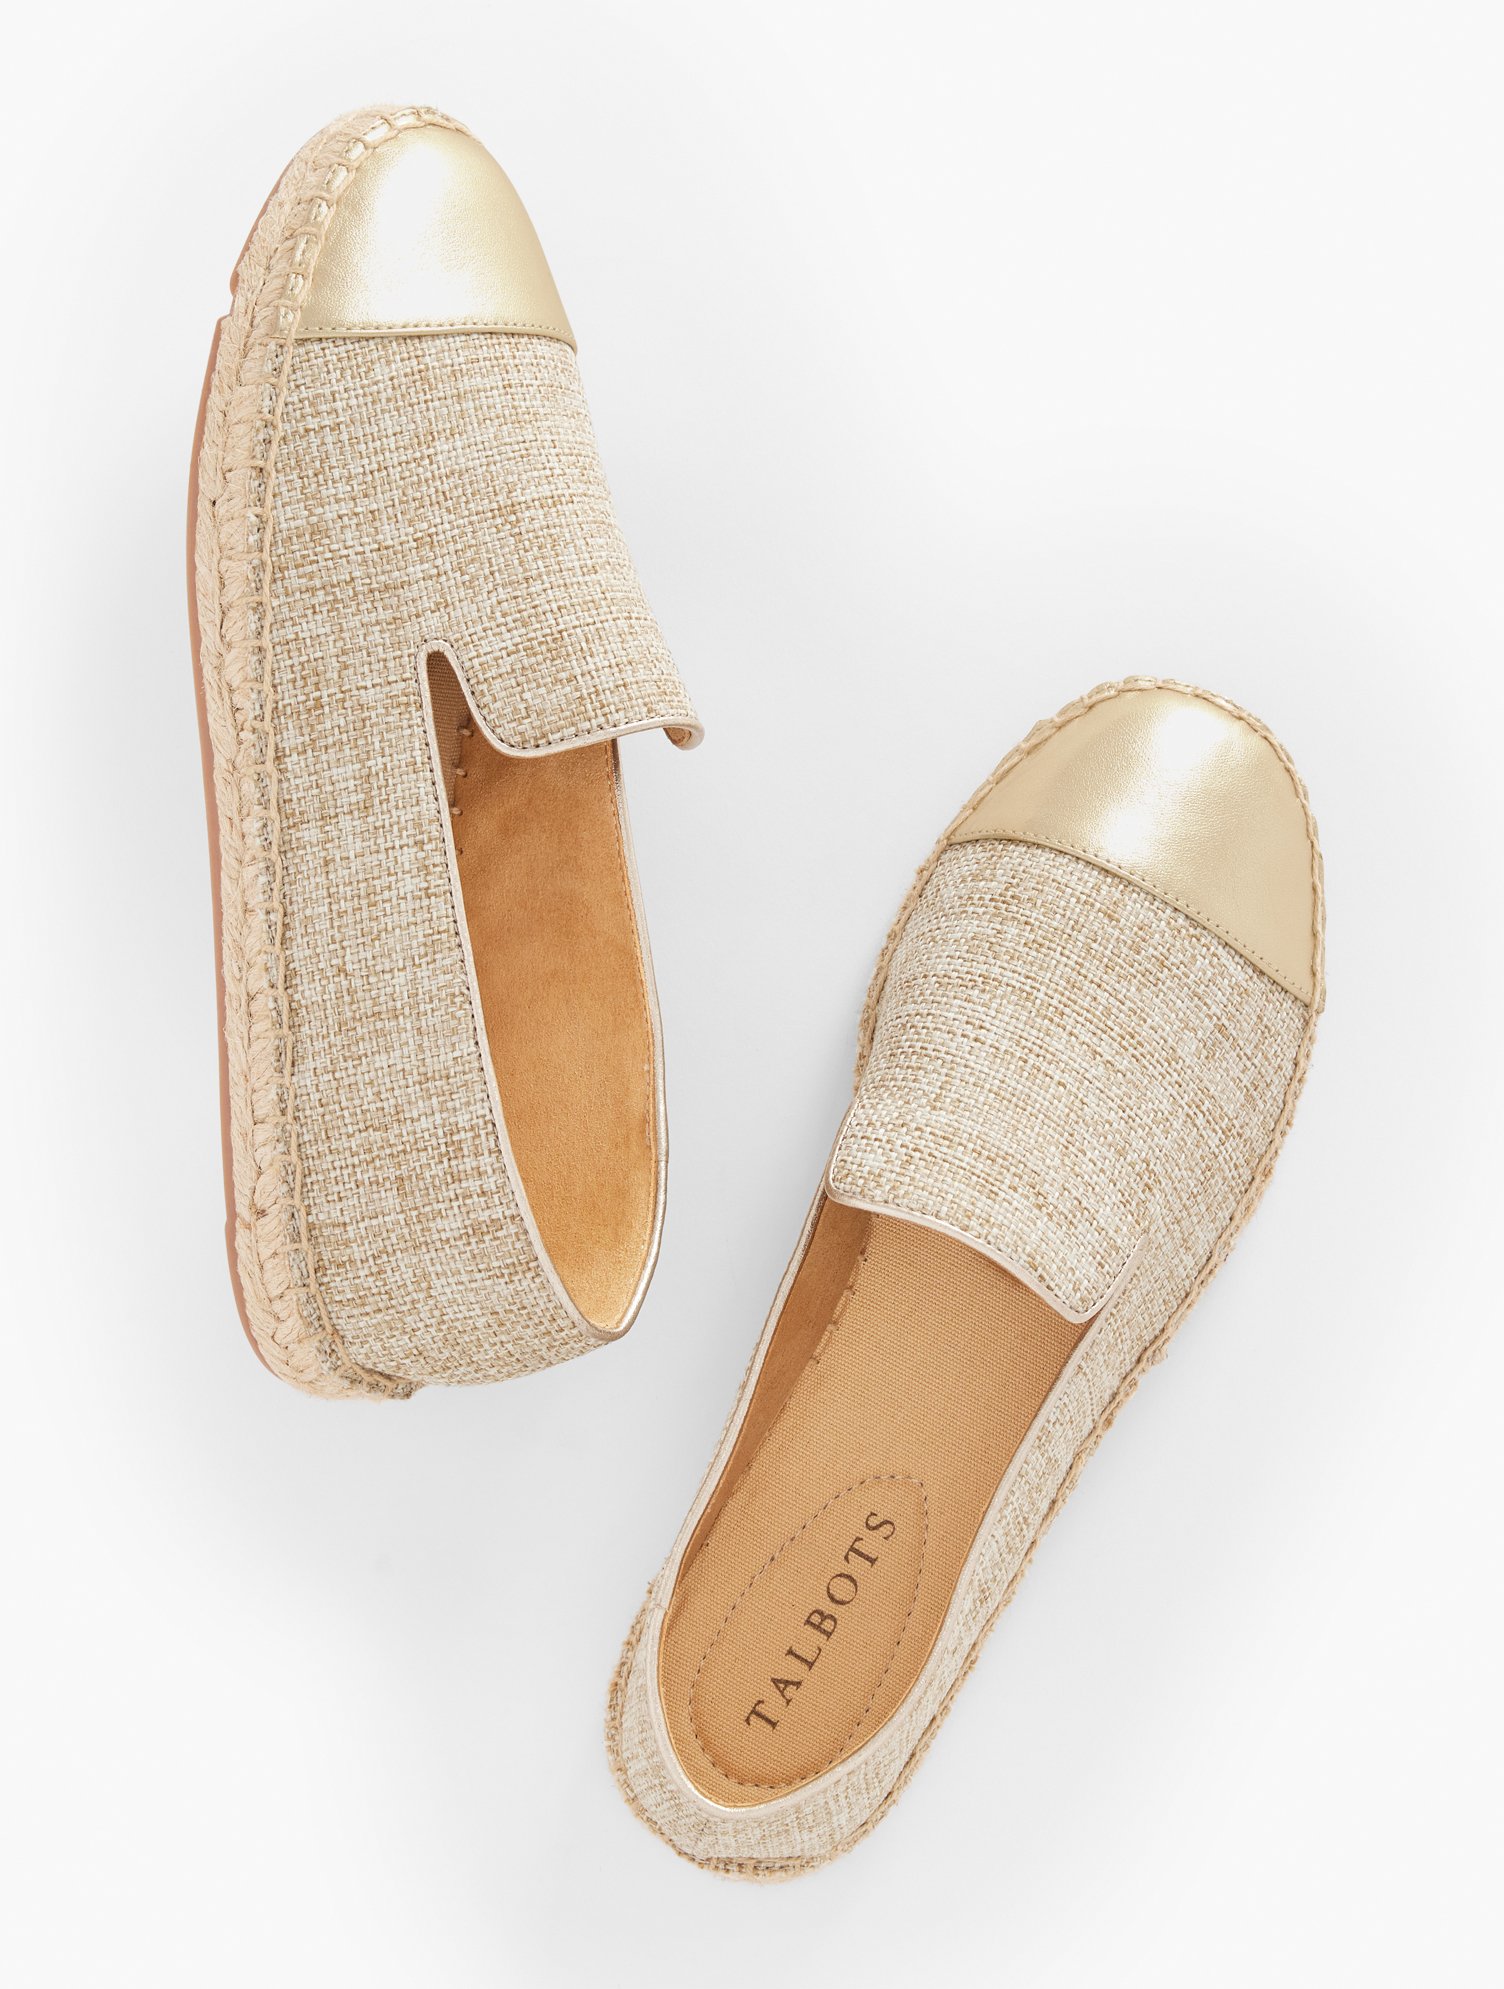 Talbots Izzy Espadrille Flats - Linen - Natural/gold - 10 1/2 M - 100% Cotton  In Natural,gold